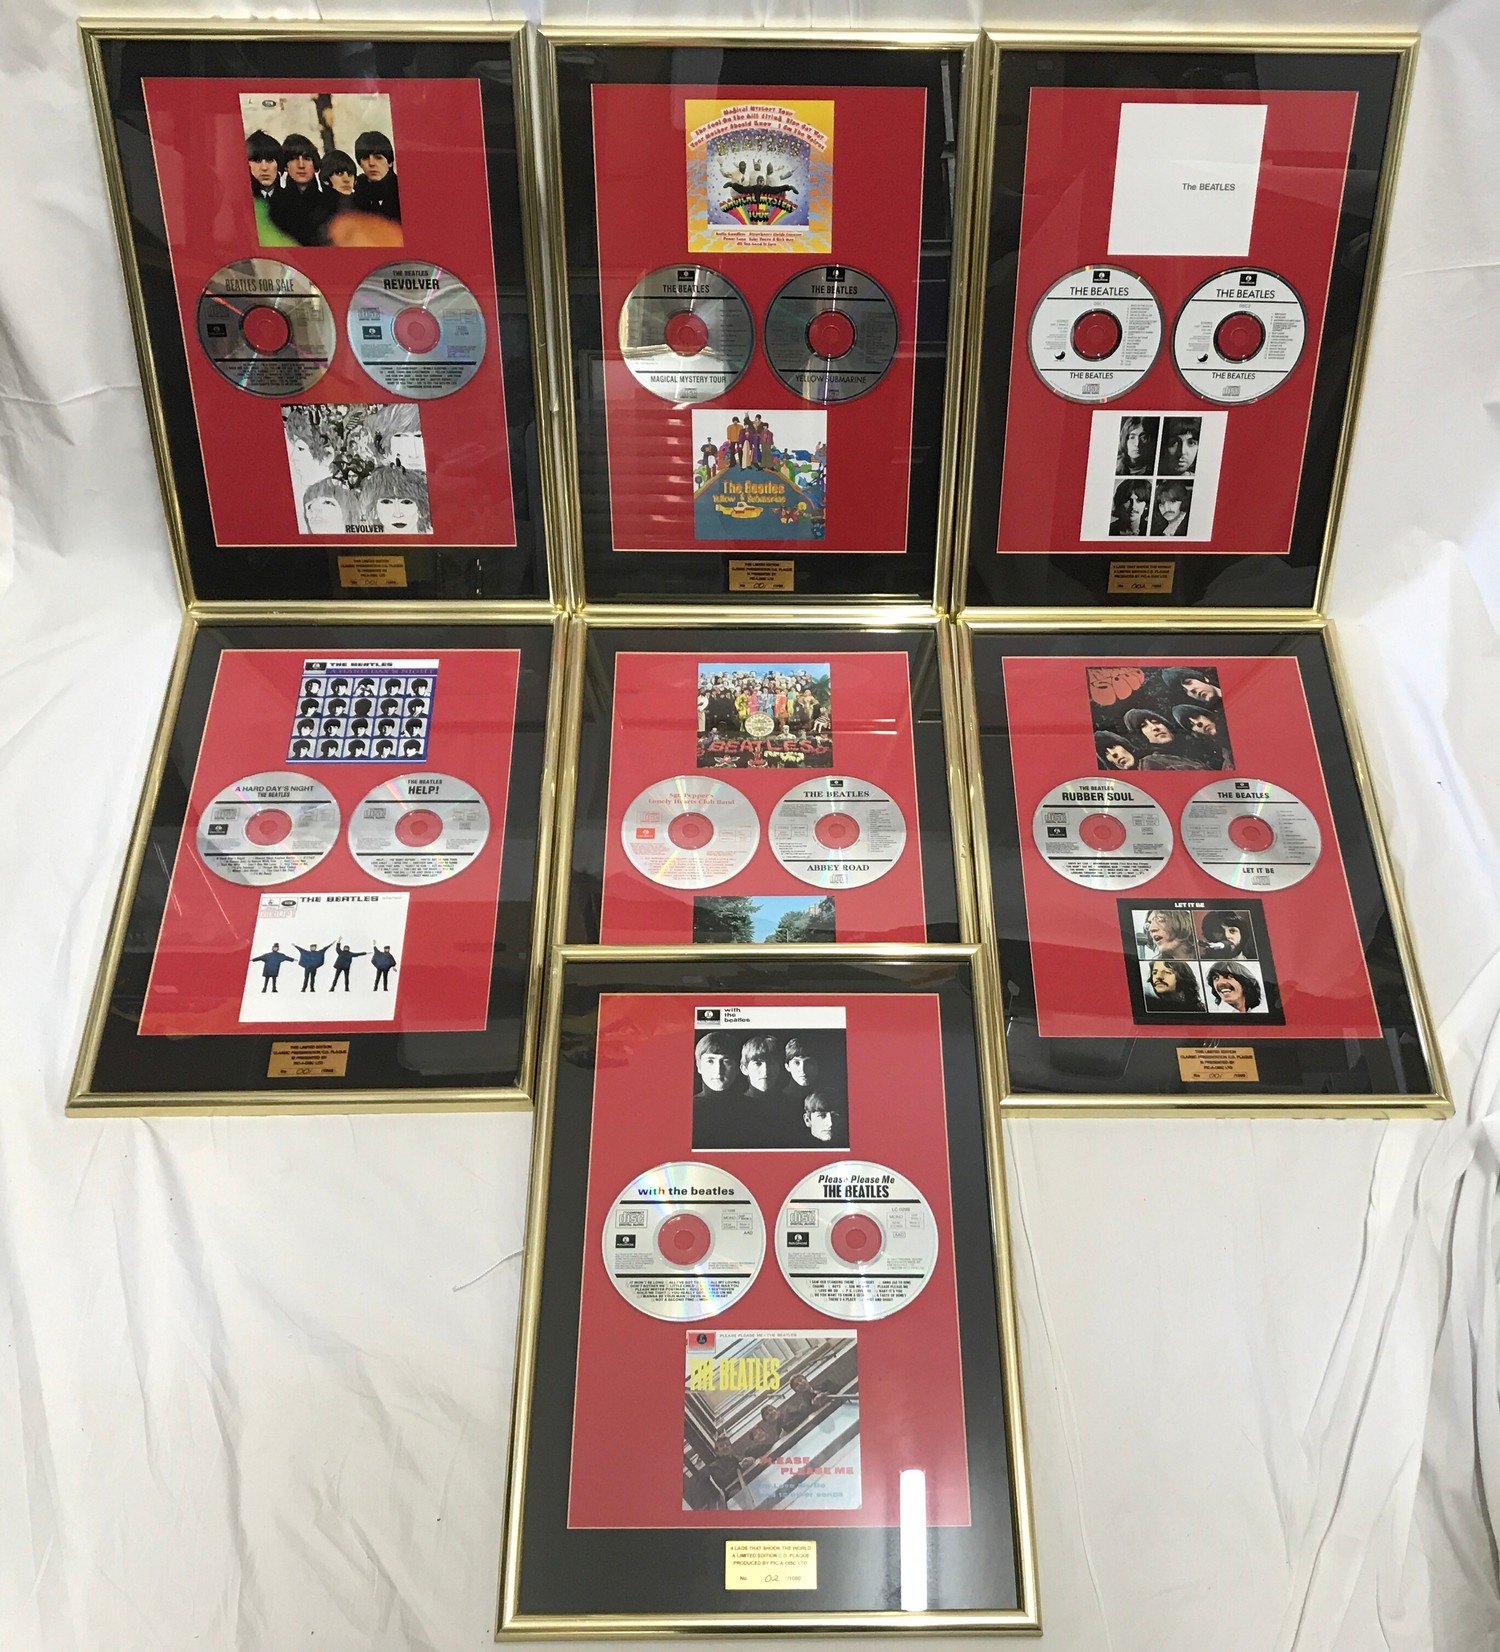 Framed The Beatles CD and sleeves presented by Pic-a-disc Ltd, The Magical Mystery Tour and Yellow